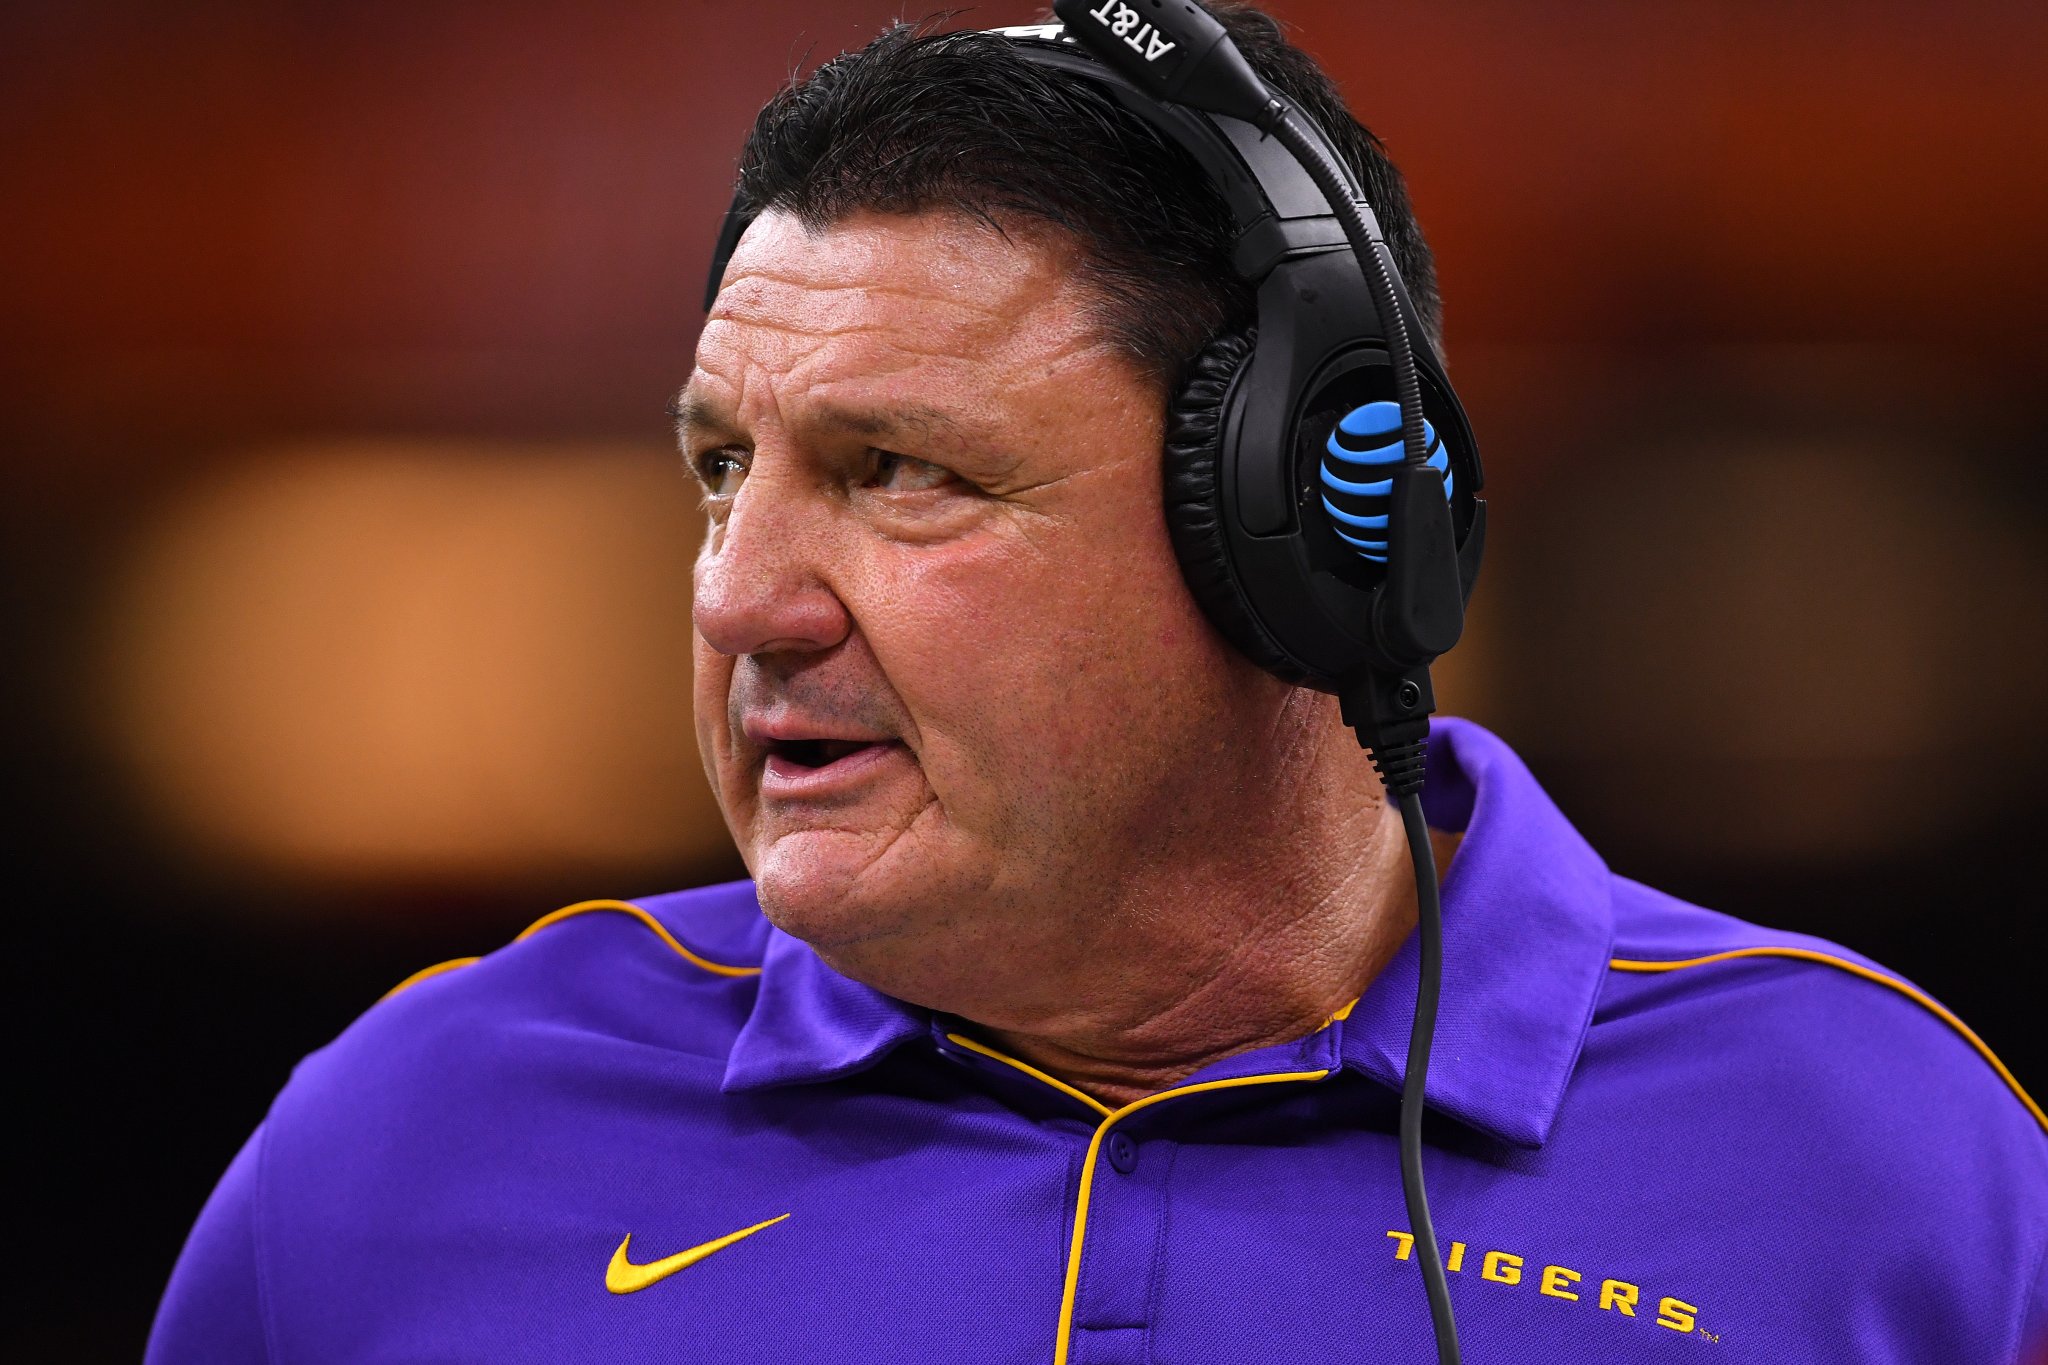 LSU Coach Ed Orgeron Gets Mocked After Getting Embarrassed By Auburn On The Same Week He Showed Off His New Girlfriend